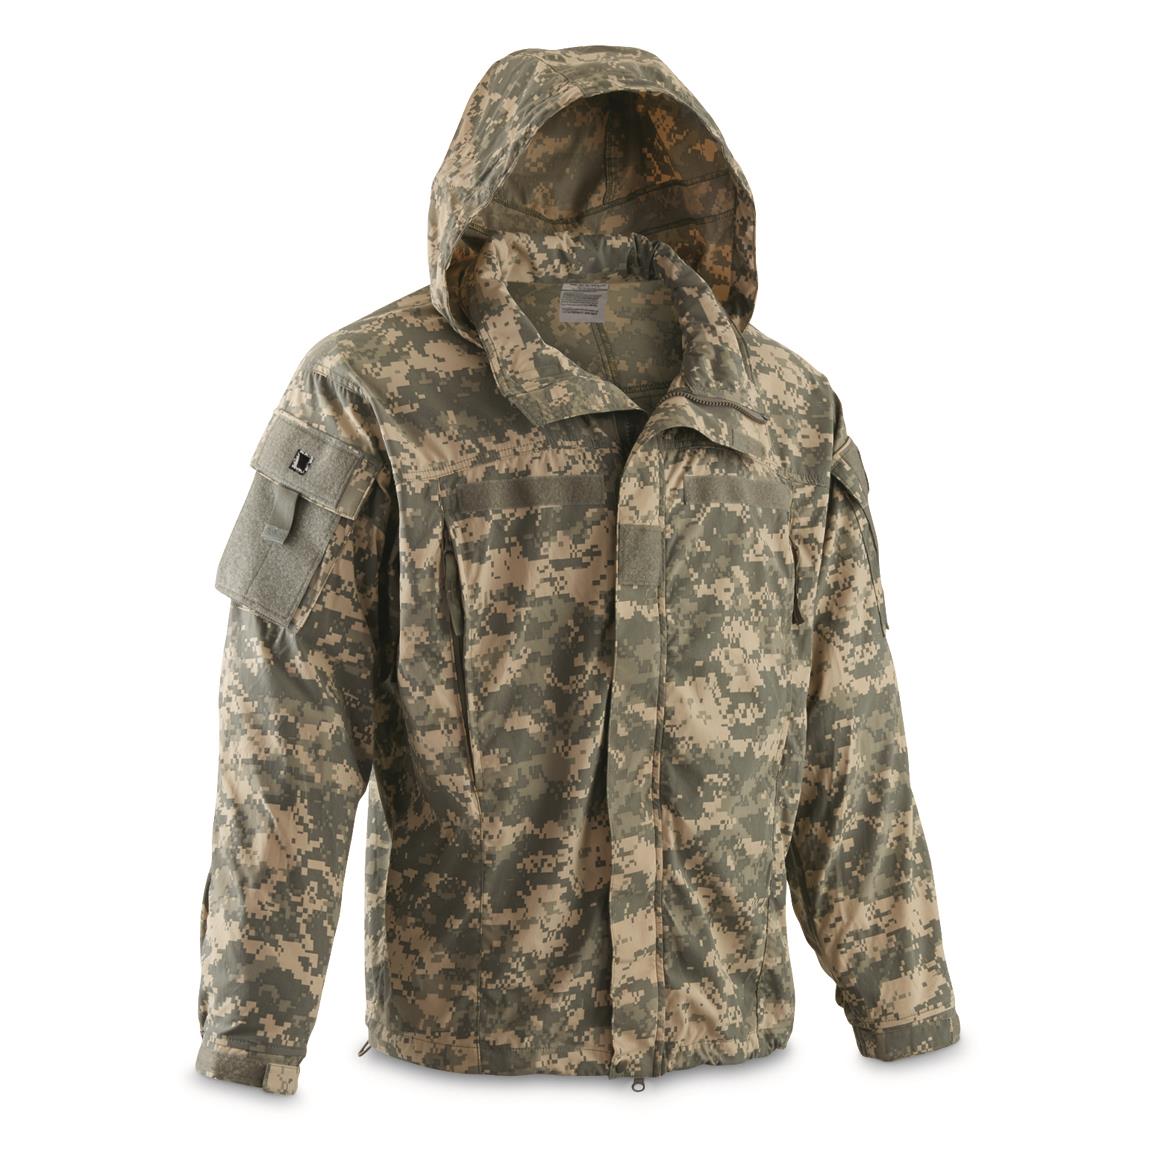 Army Military Jacket | Sportsman's Guide